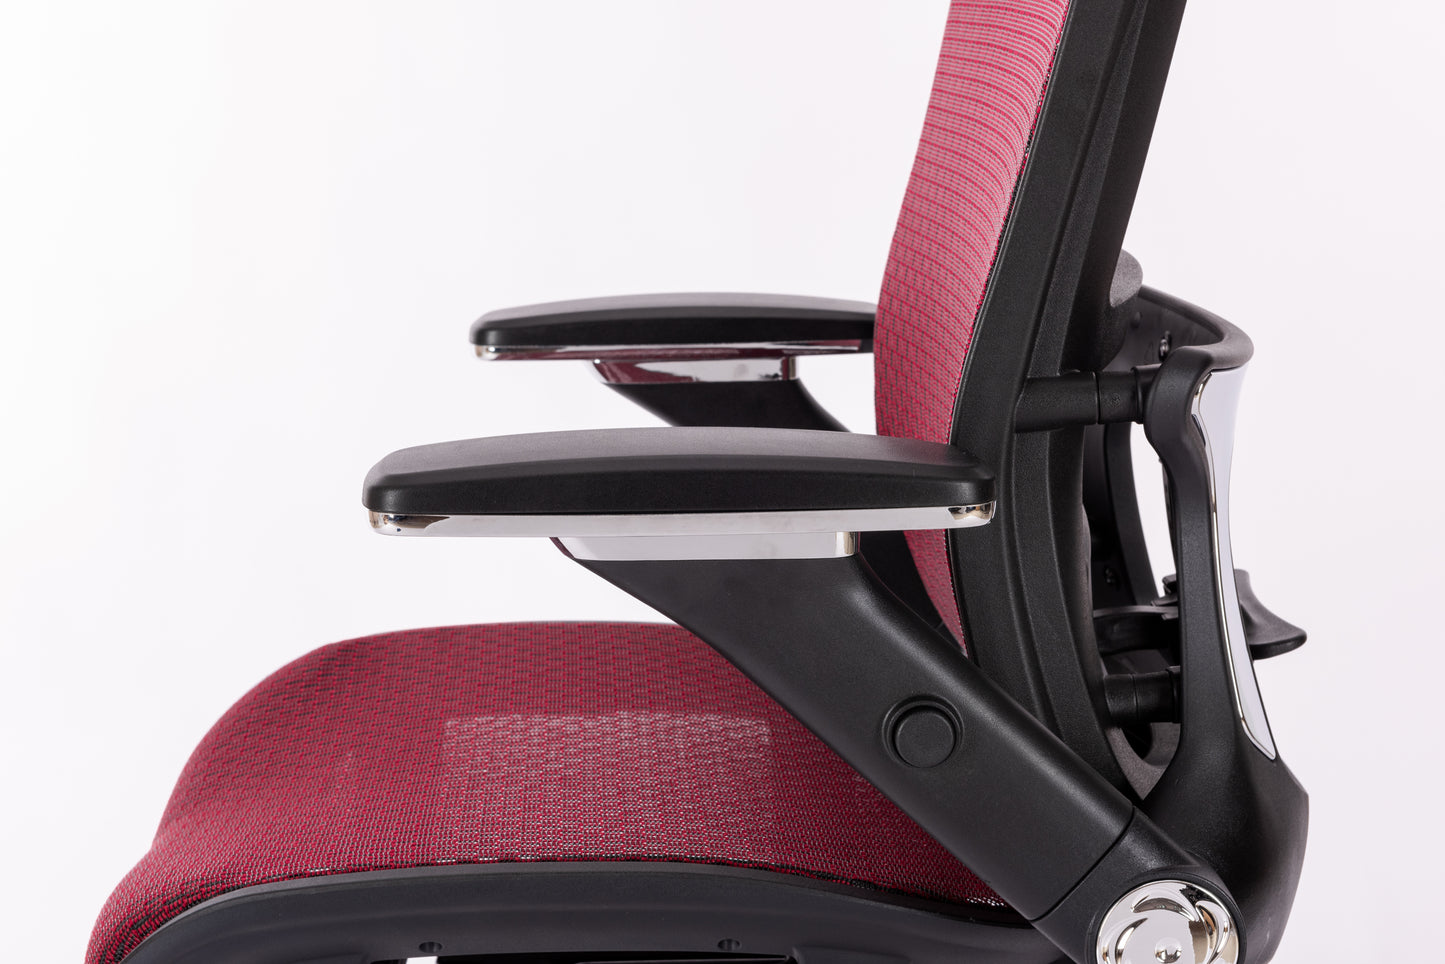 Ergonomic Mesh Office Chair - Rolling Home Desk Chair with 4D Adjustable Flip Armrests,  Adjustable Lumbar Support and Blade Wheels(RED MESH)